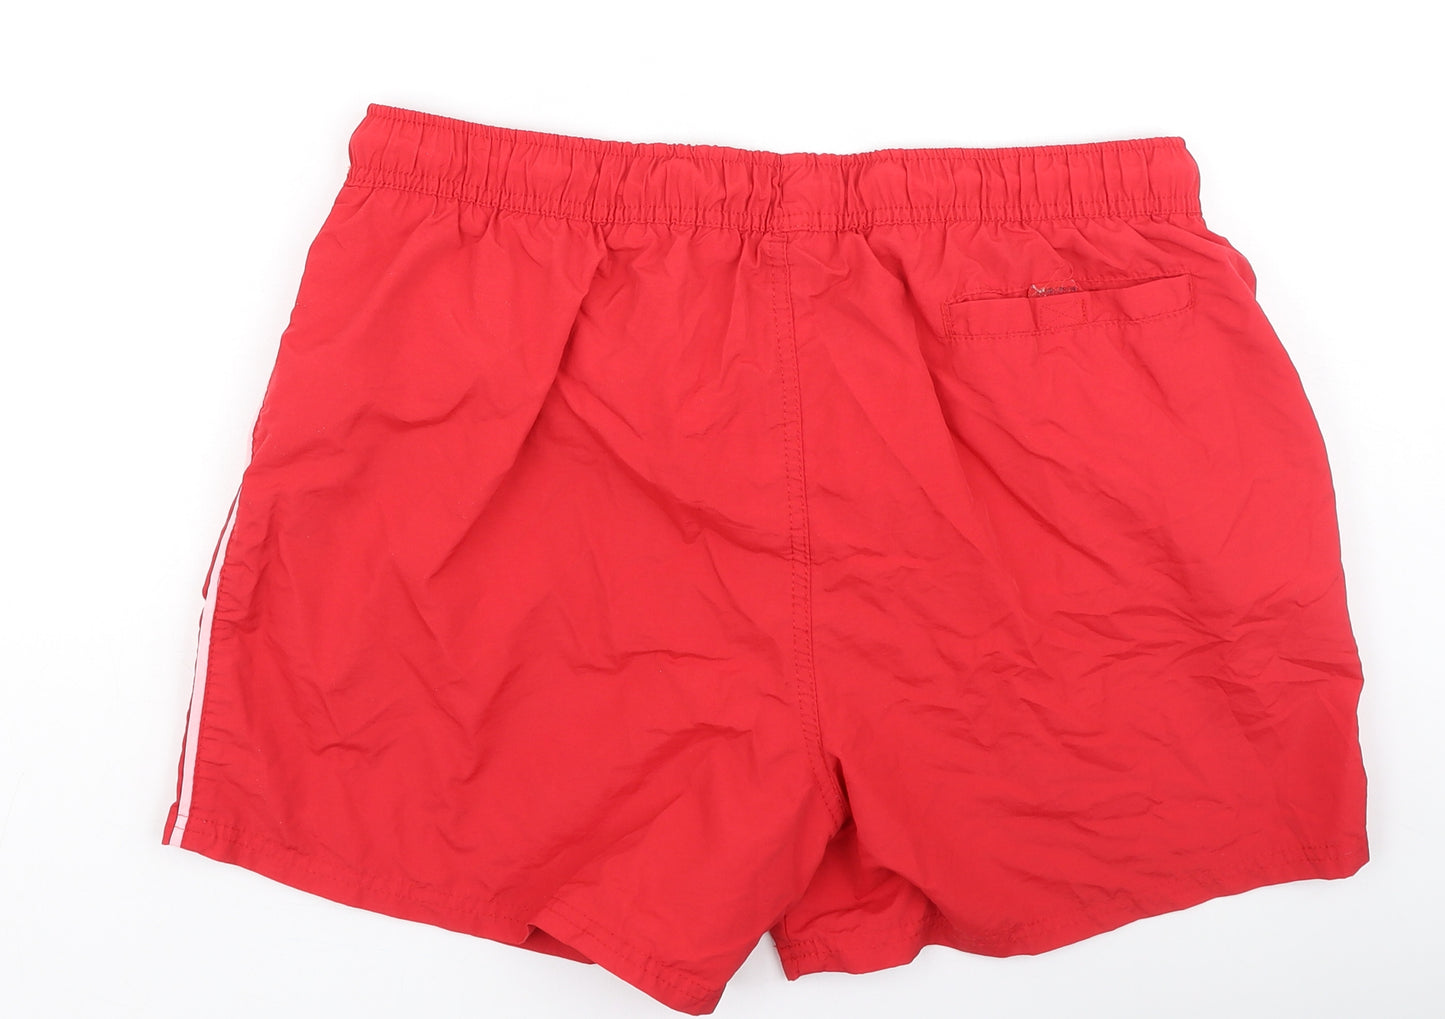 Primark Mens Red  Polyester Sweat Shorts Size L L9 in Regular